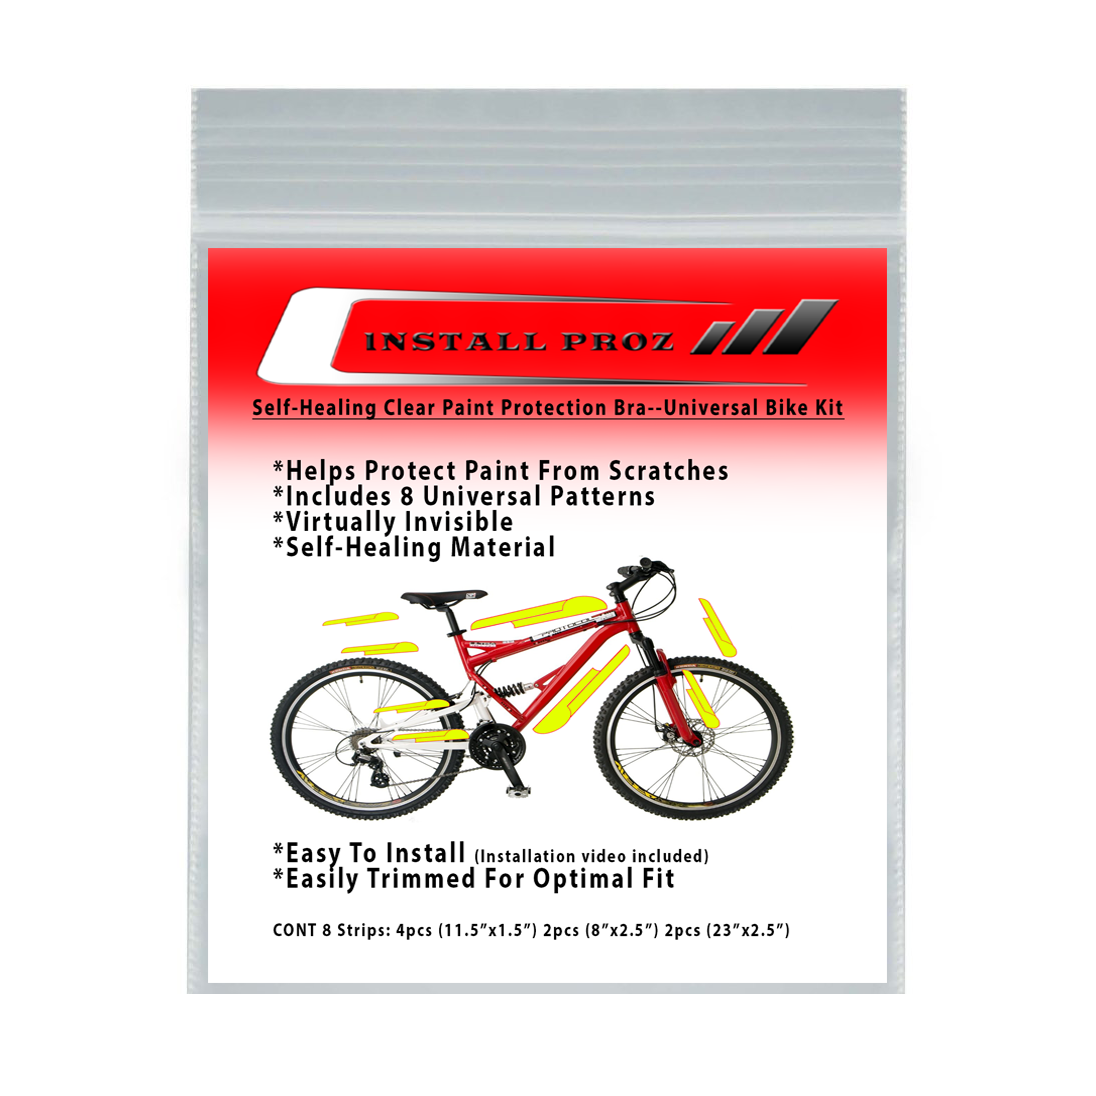 Self-Healing Clear Paint Protection Film--Universal Bicycle Kit